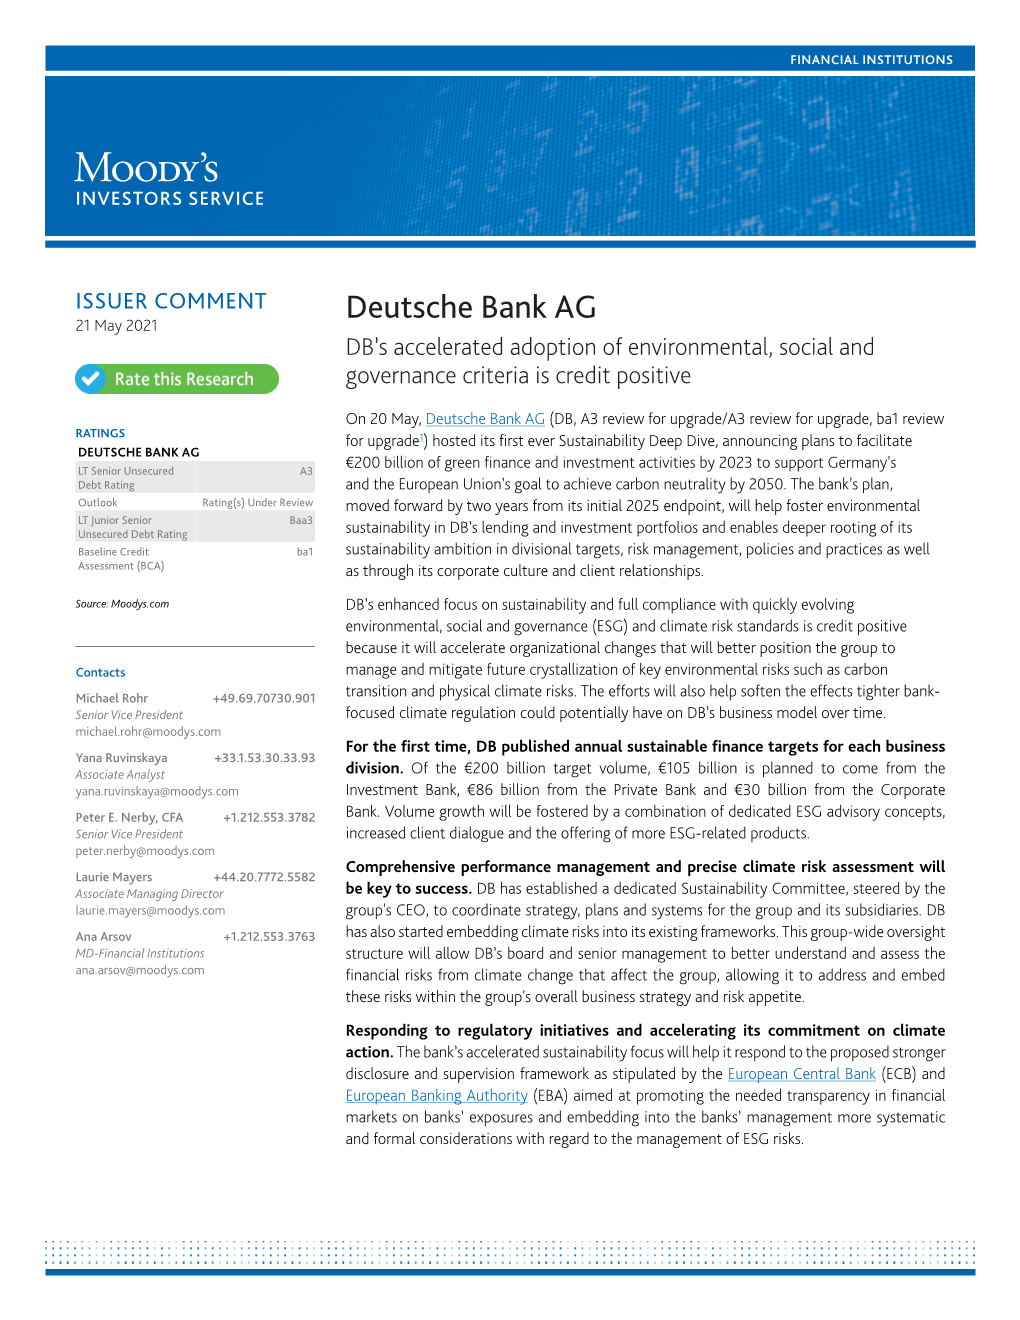 Deutsche Bank AG 21 May 2021 DB’S Accelerated Adoption of Environmental, Social and Governance Criteria Is Credit Positive